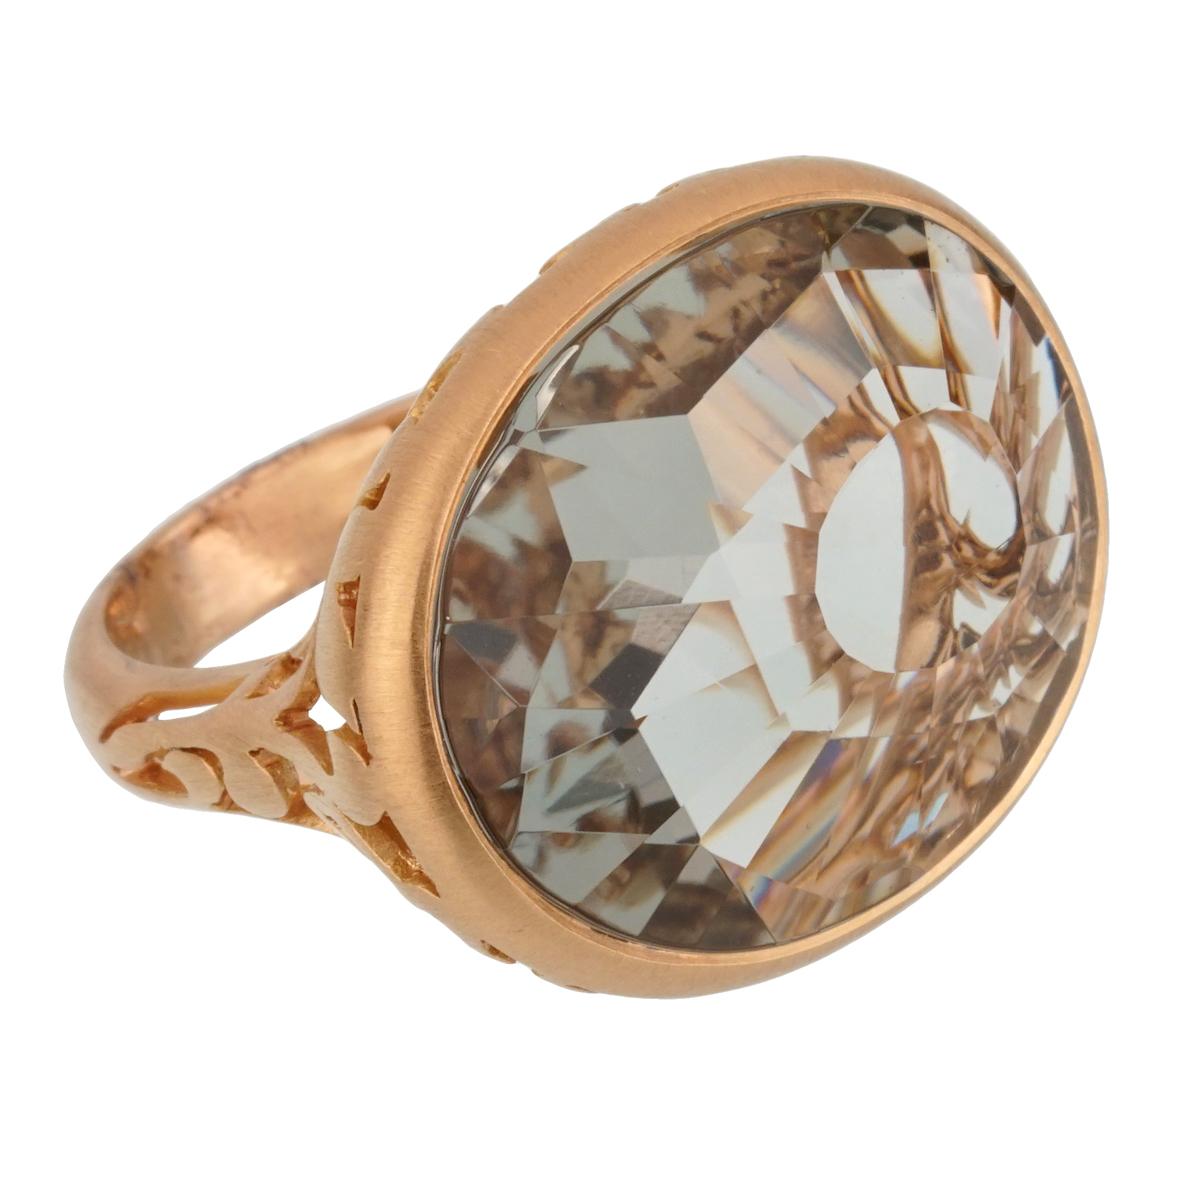 Pomellato 10 Carat Prasiolite Cocktail Rose Gold Ring In New Condition For Sale In Feasterville, PA